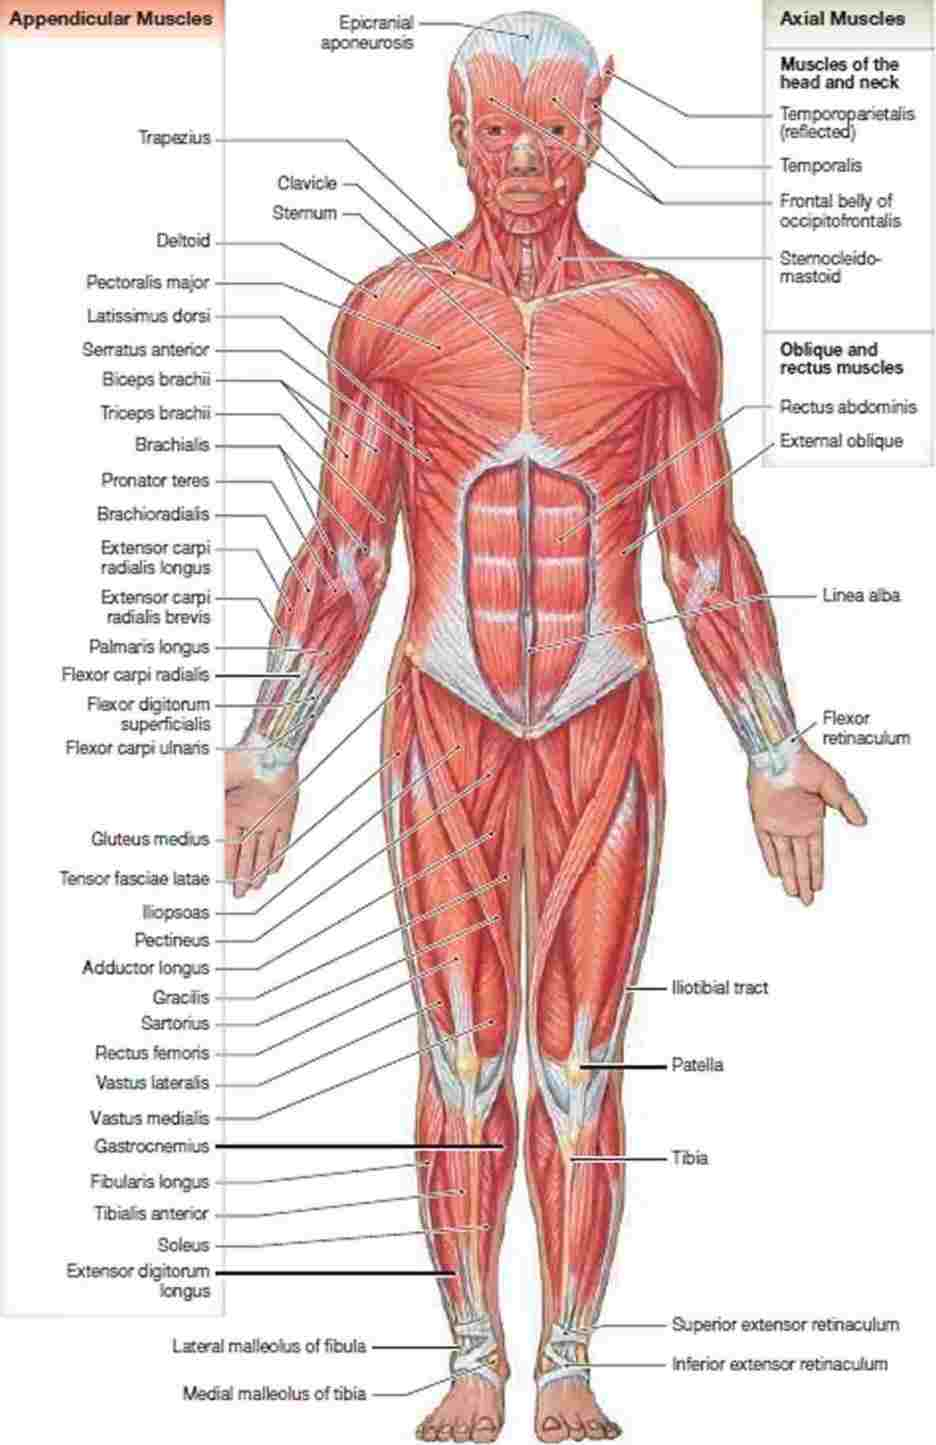 Human Muscle Diagram The Human Muscle Anatomy Diagram Of Anatomy